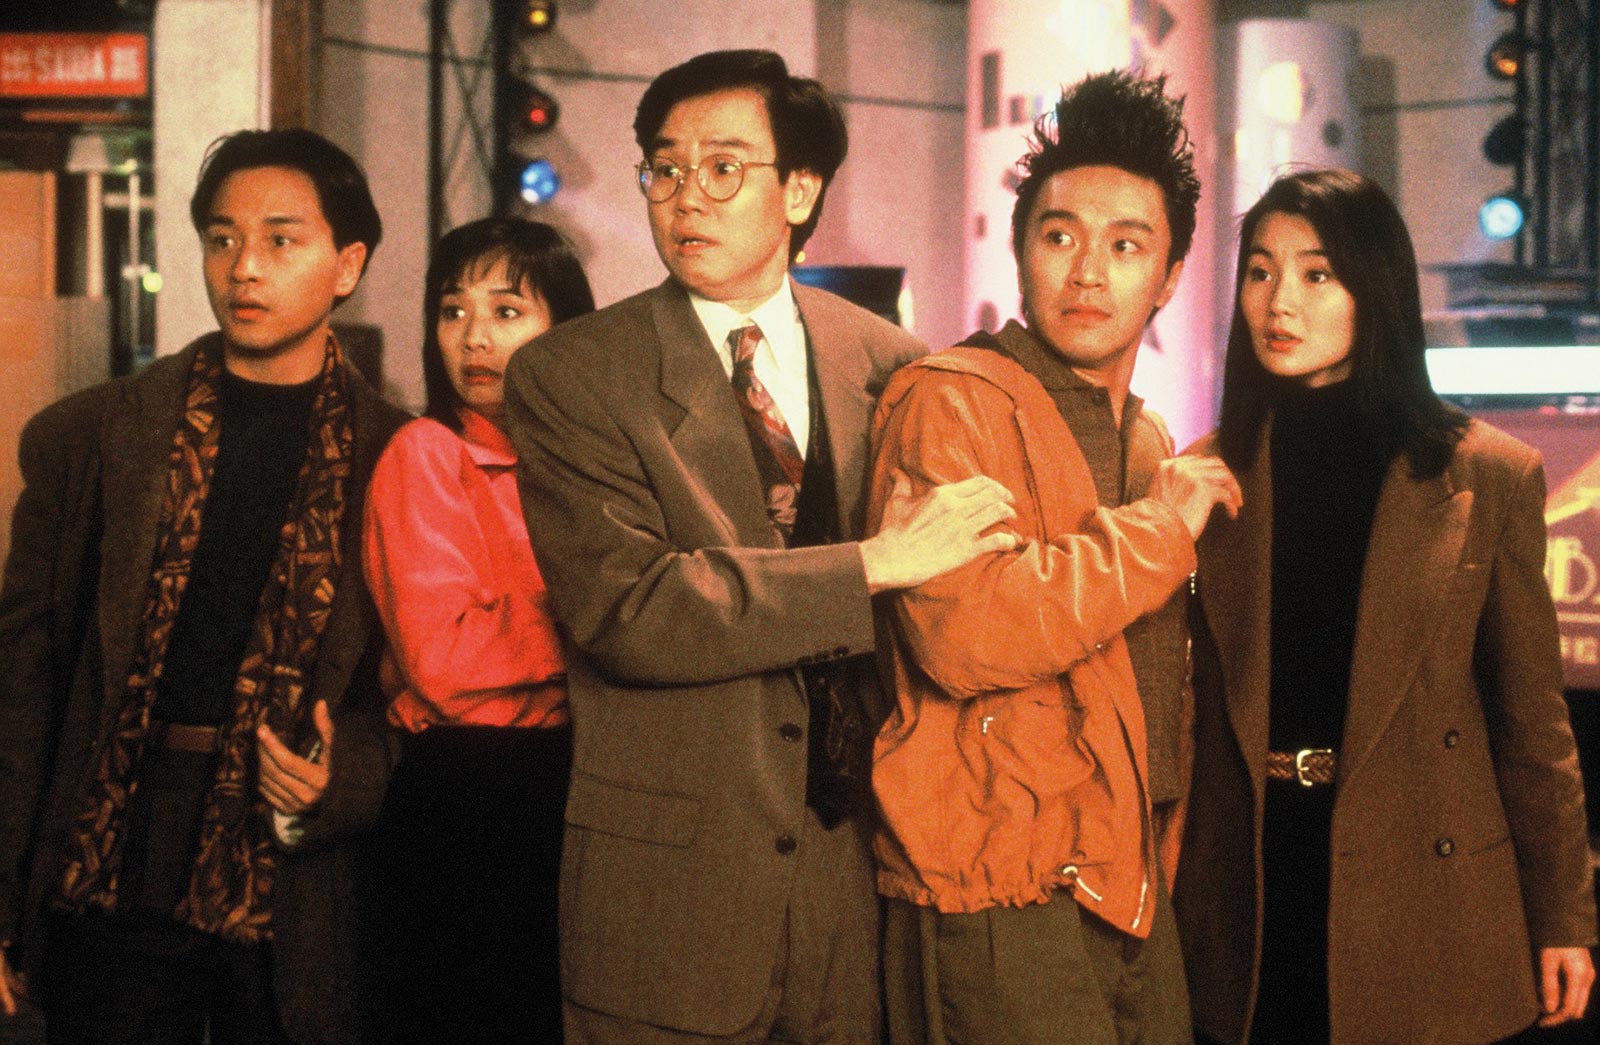 chinese-new-year-movies-all-'s-well-end-'s-well-stephen-chow-maggie-cheung-sandra-ng